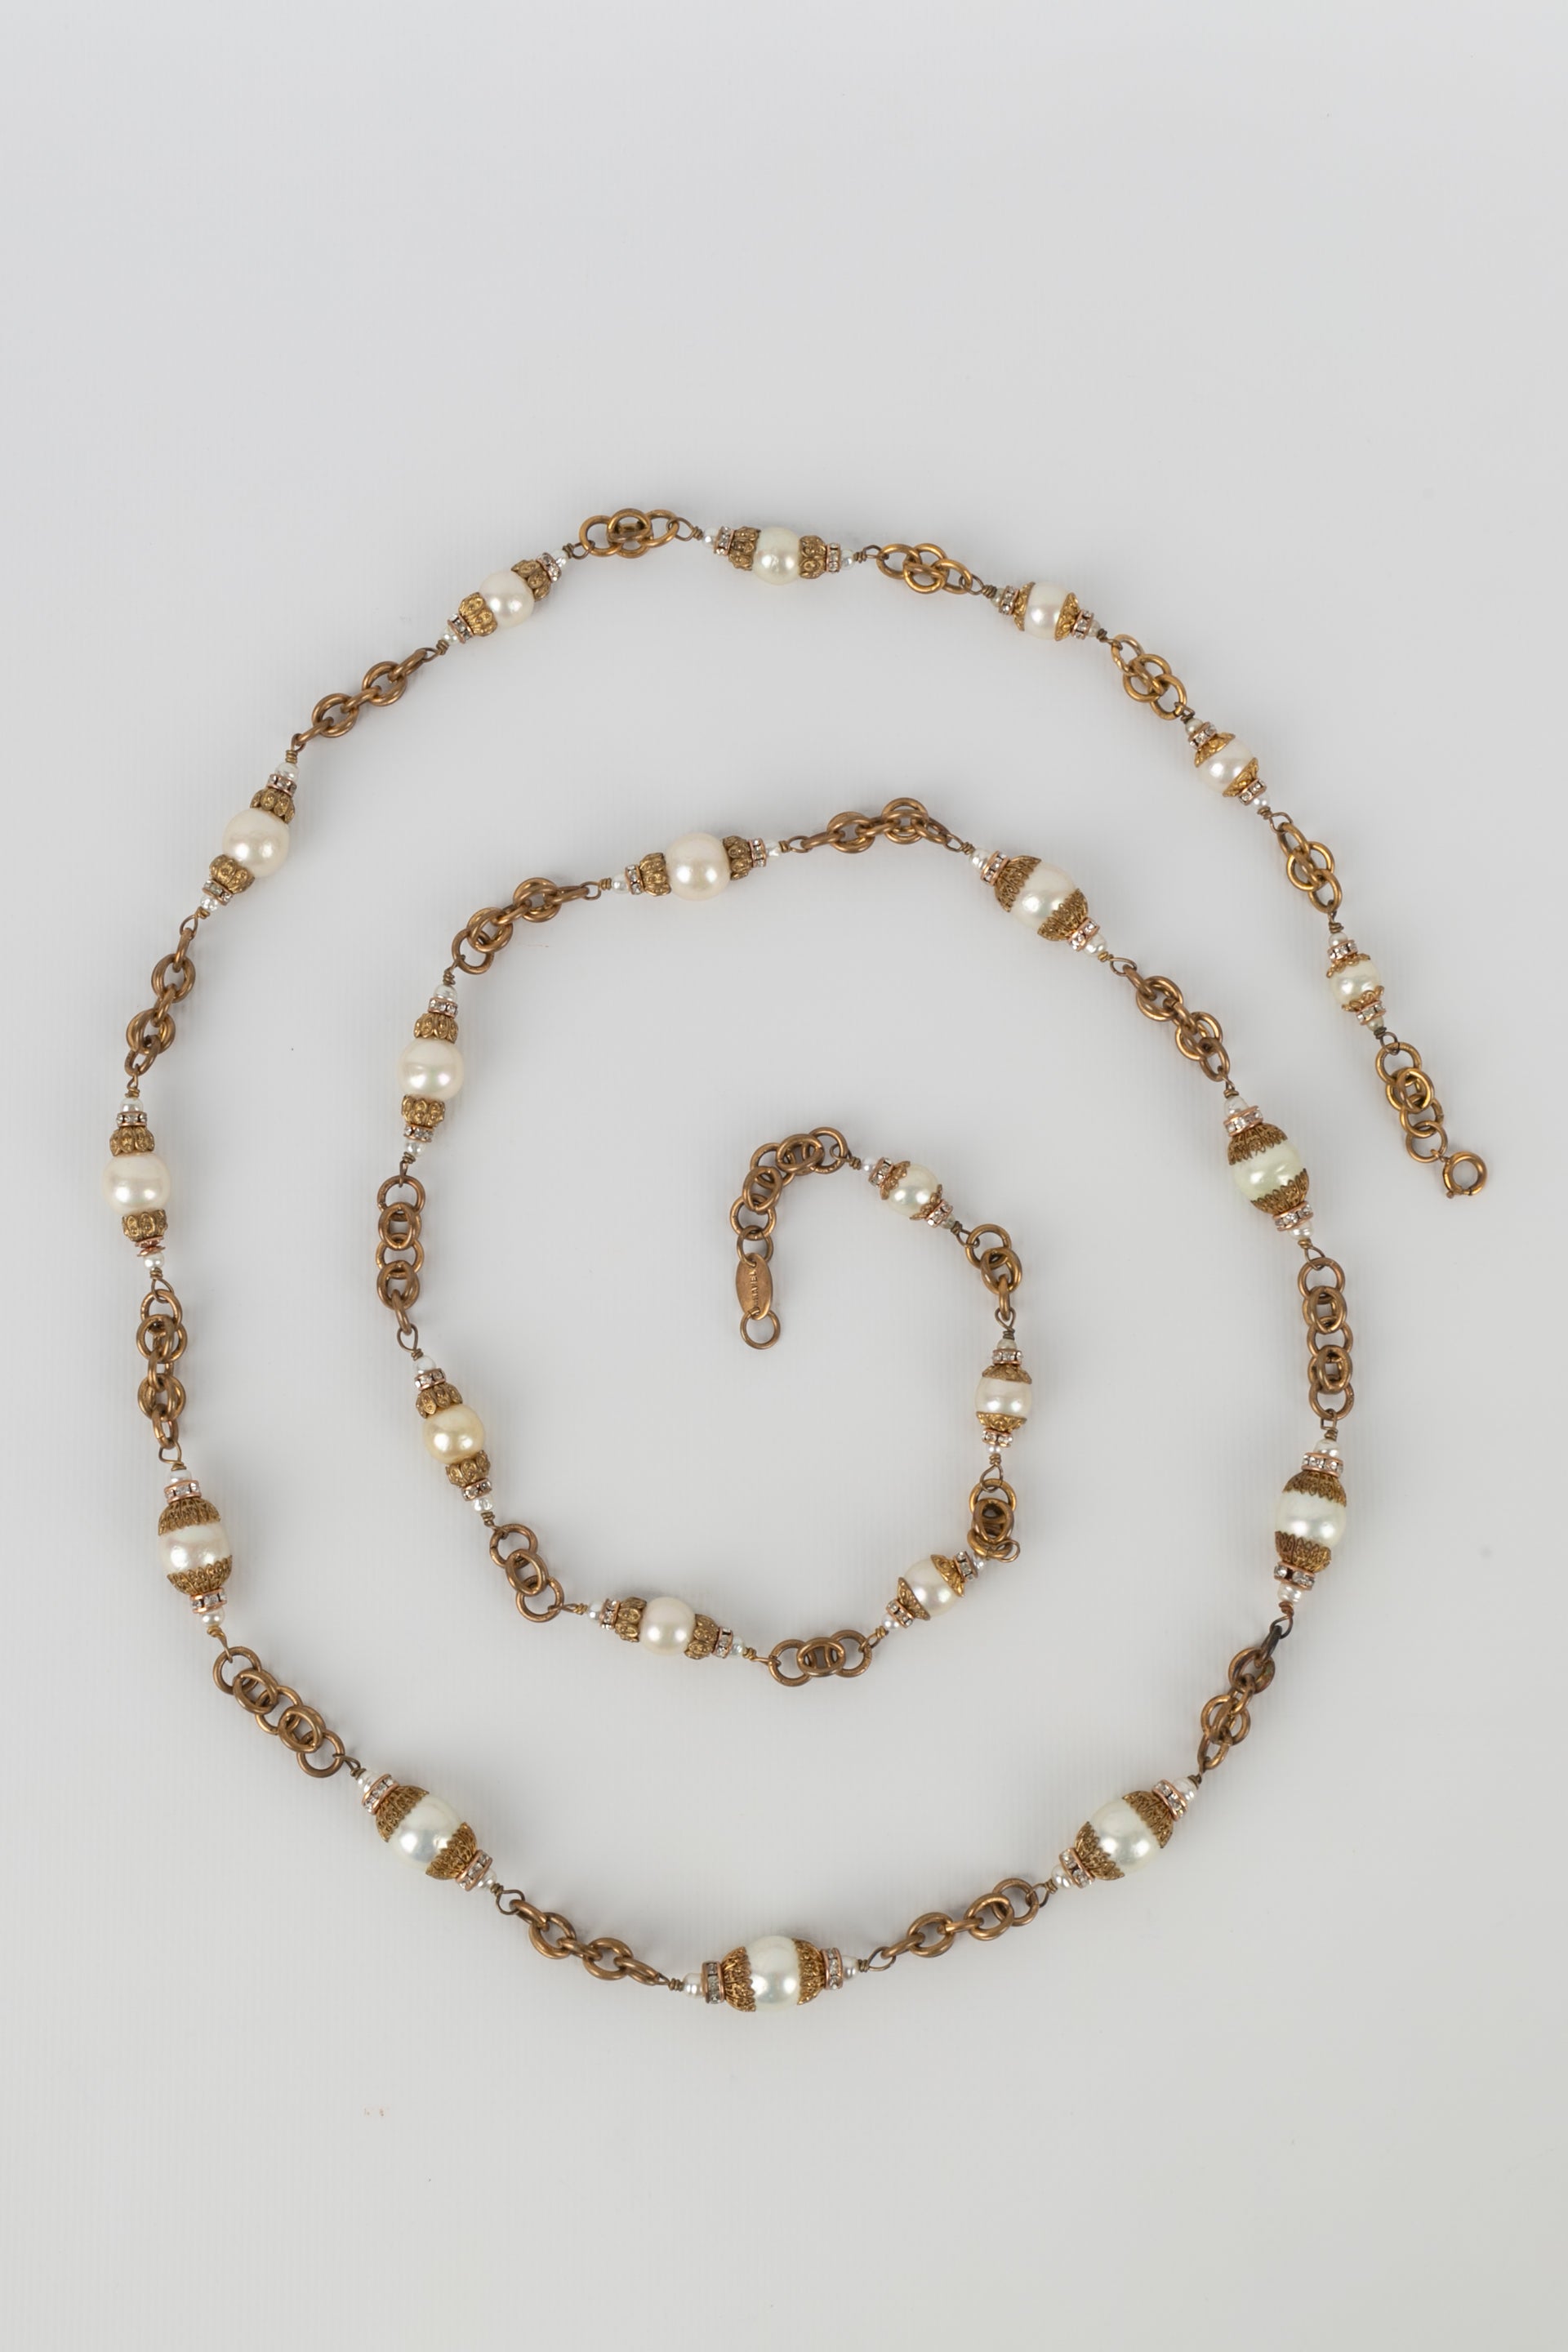 Chanel pearl necklace 1950-60